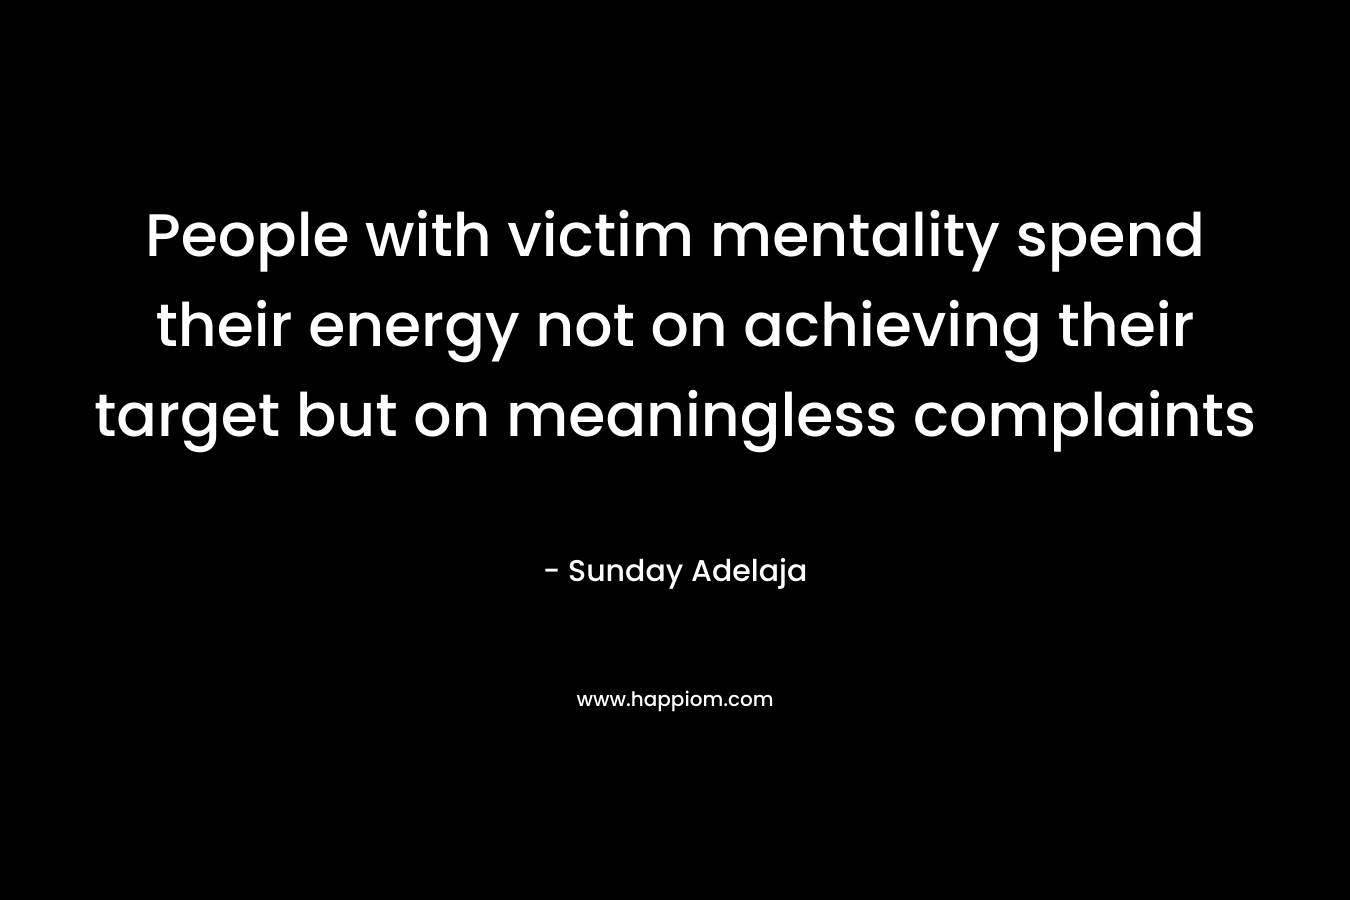 People with victim mentality spend their energy not on achieving their target but on meaningless complaints